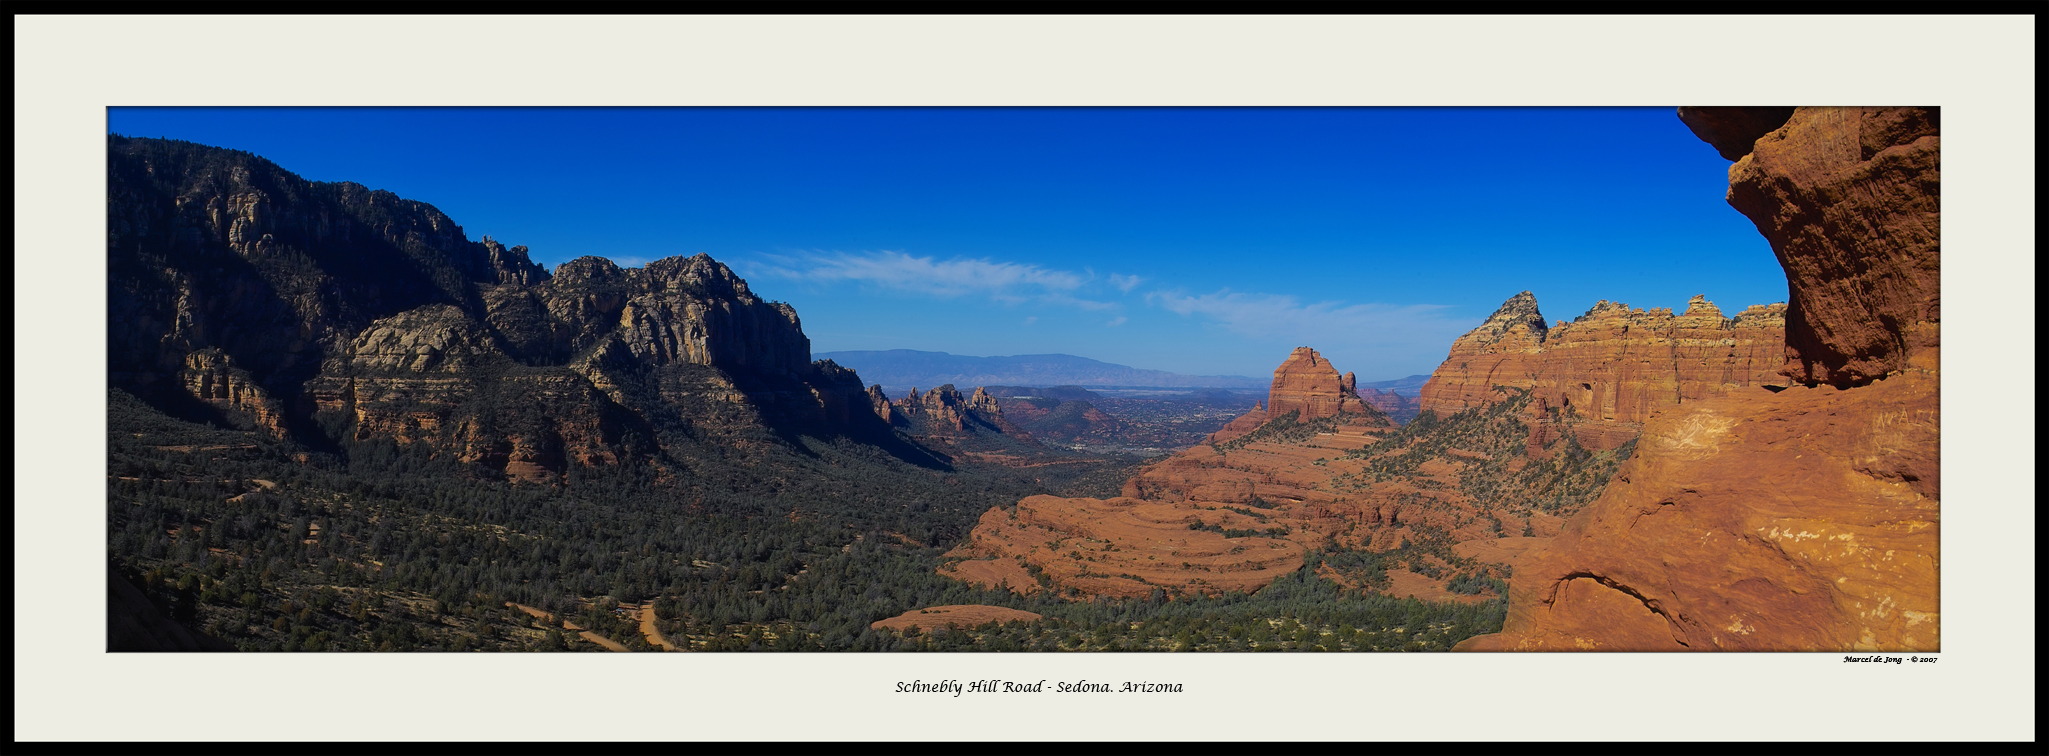 Sedona from Schneblly Hill